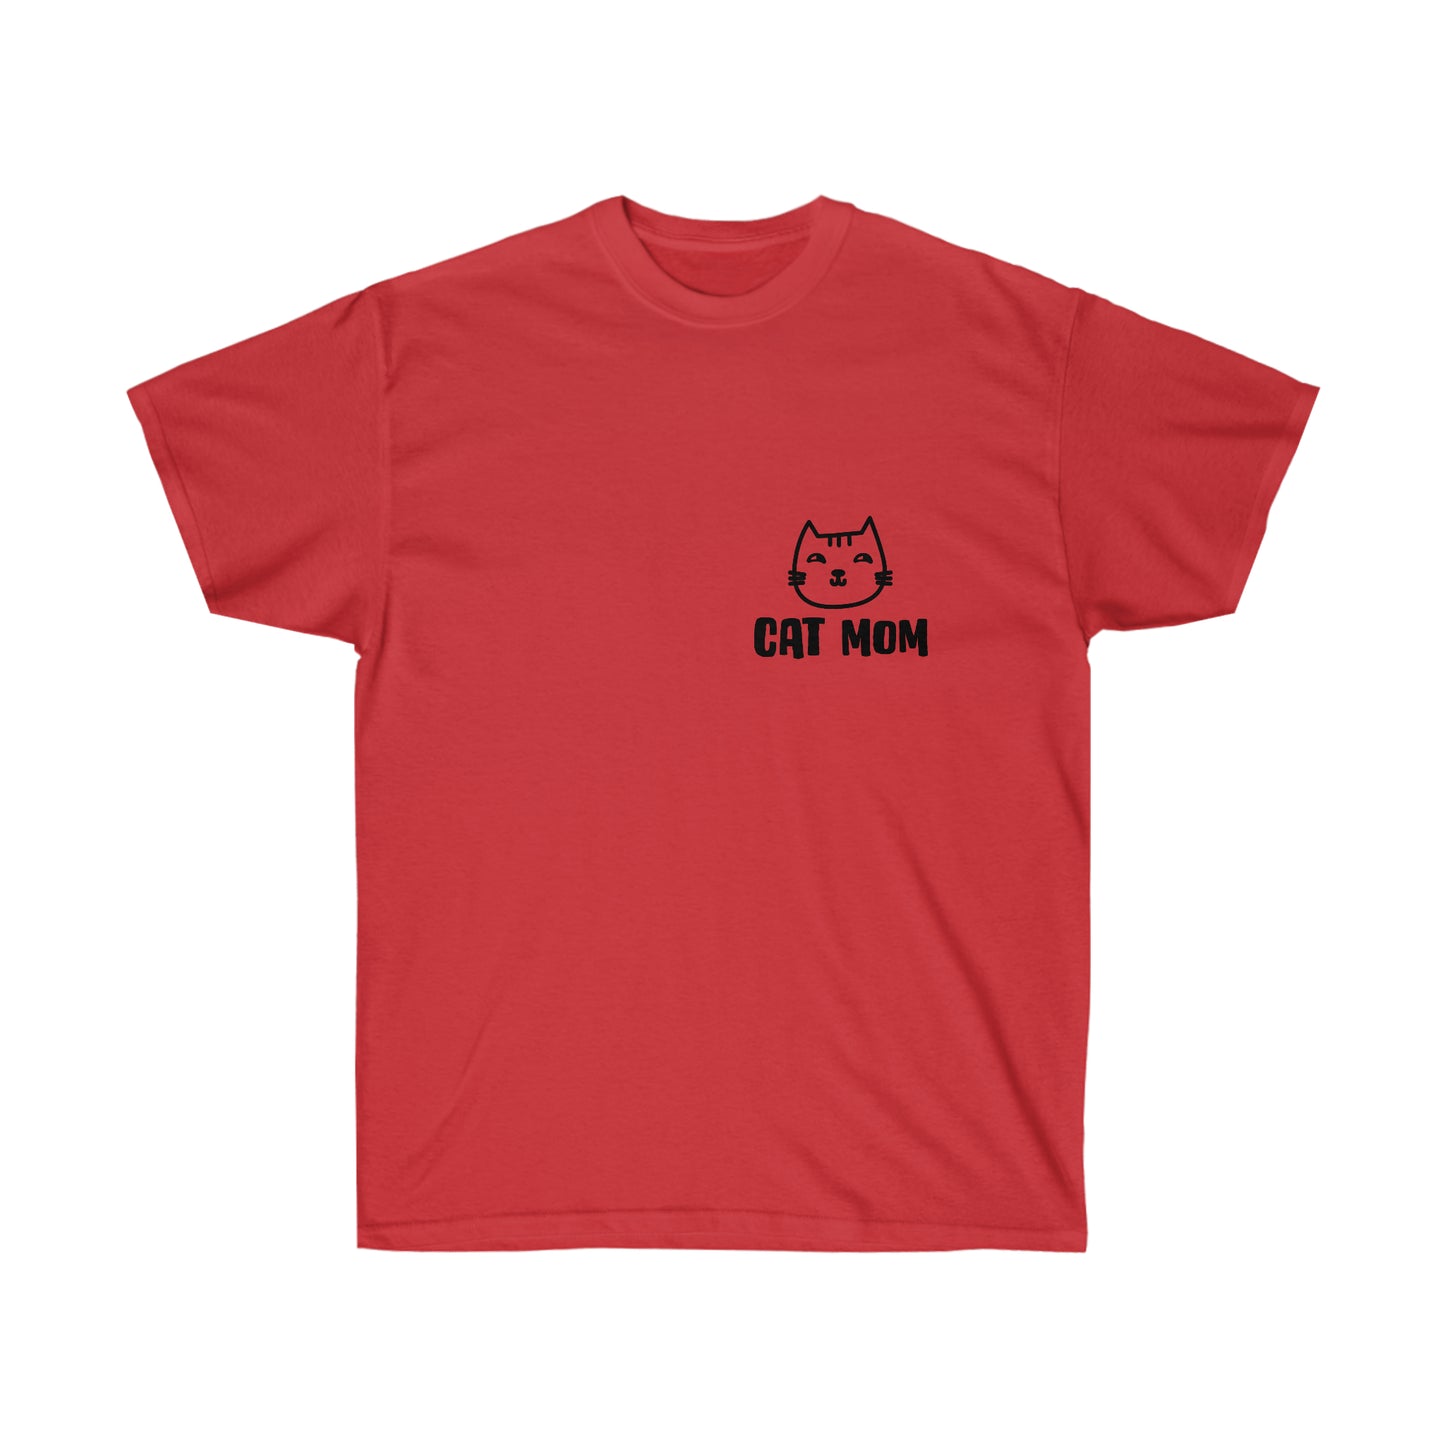 Cat Mom T-Shirt - Cute and Stylish Tee for Cat Lovers - Gift for Cat Moms